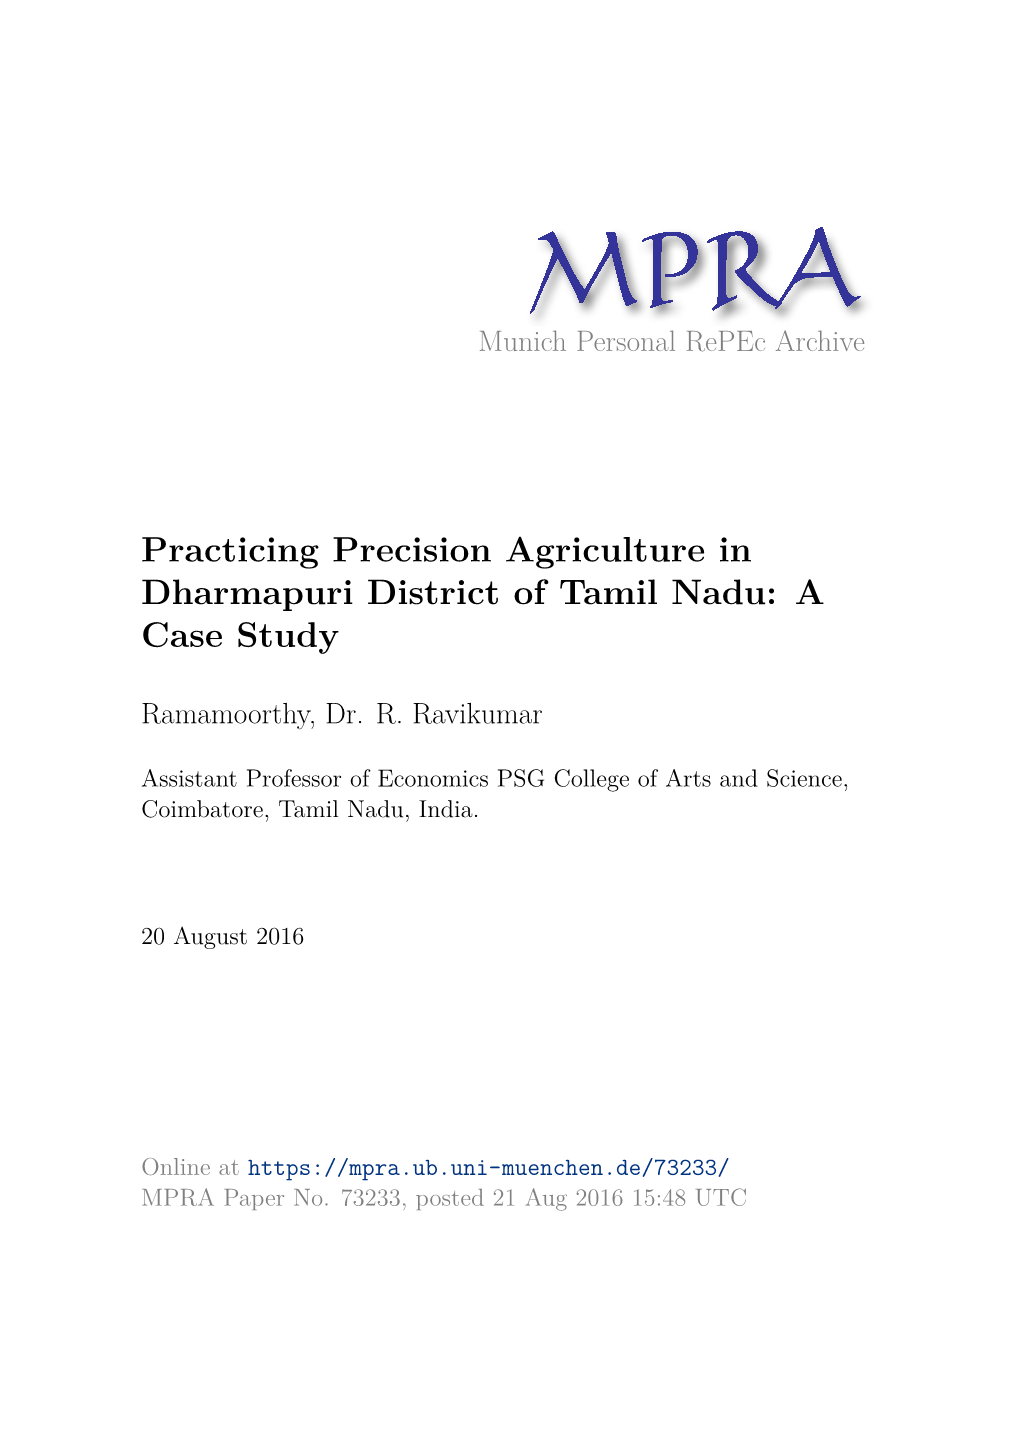 Practicing Precision Agriculture in Dharmapuri District of Tamil Nadu: a Case Study